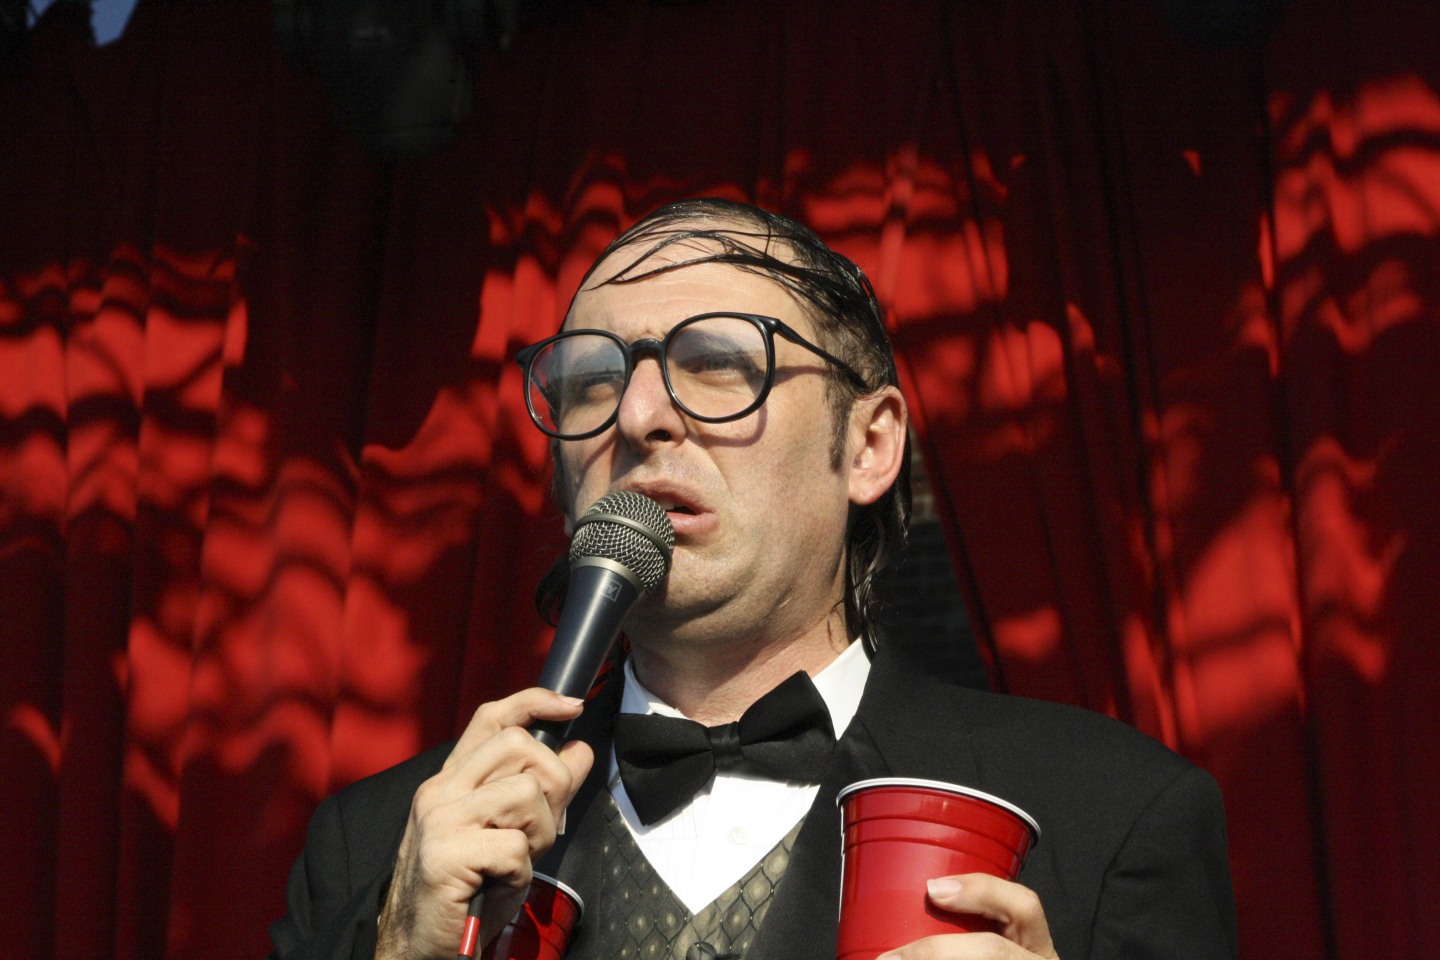 Neil Hamburger contains multitudes, but not a whole hotel